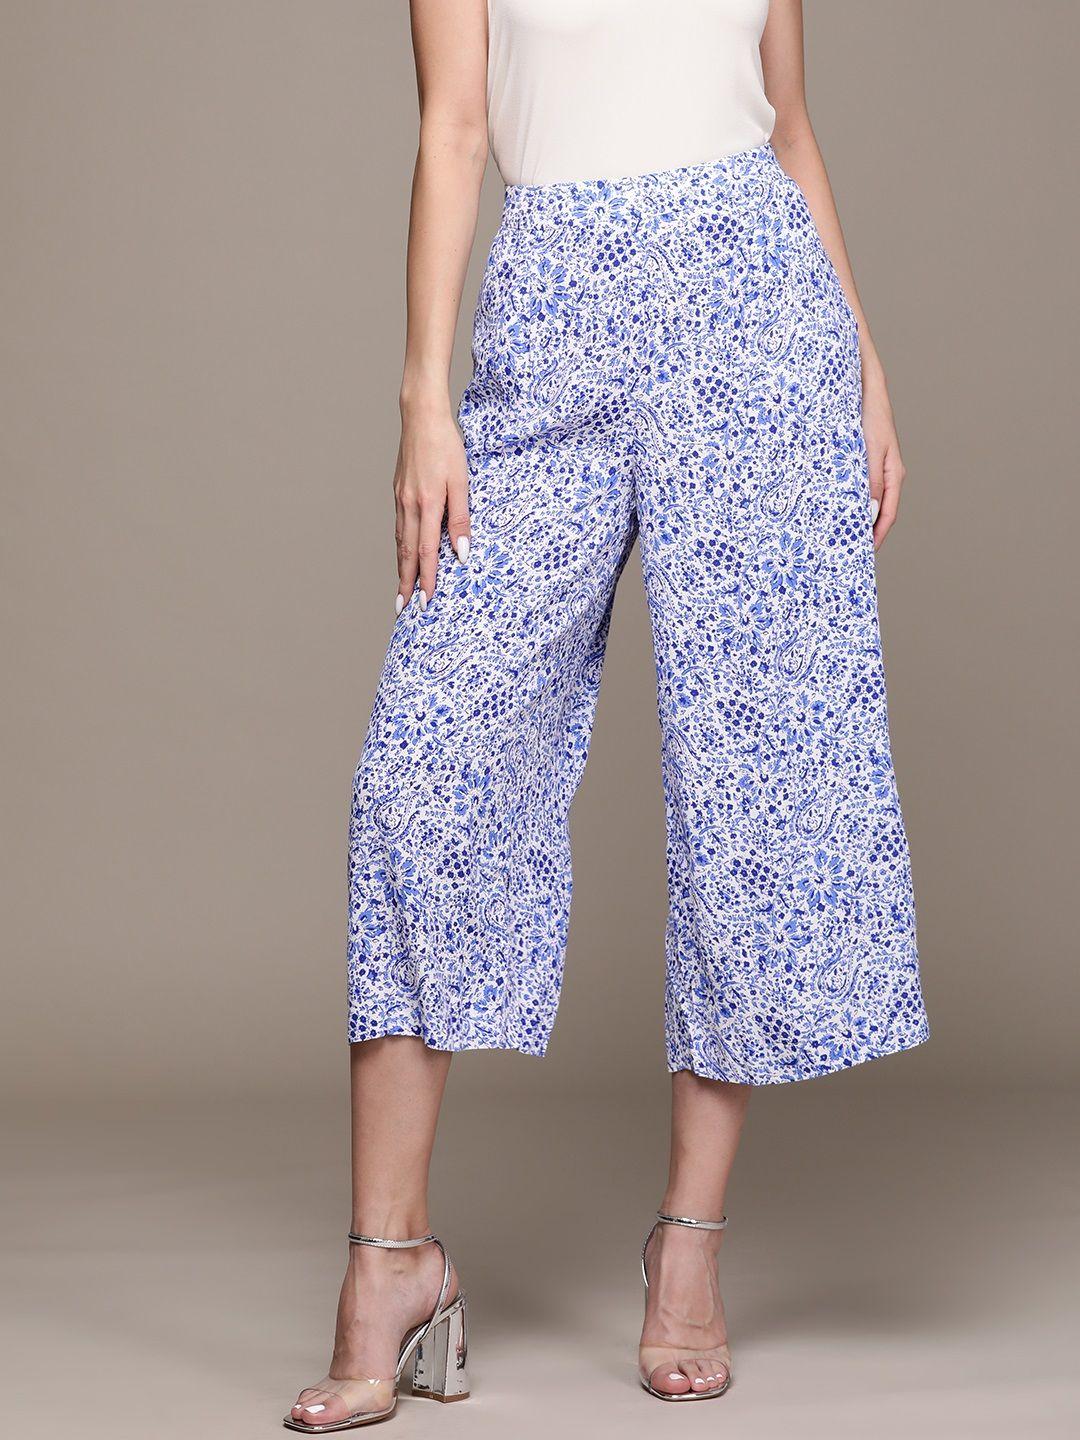 mango women floral printed culottes trousers